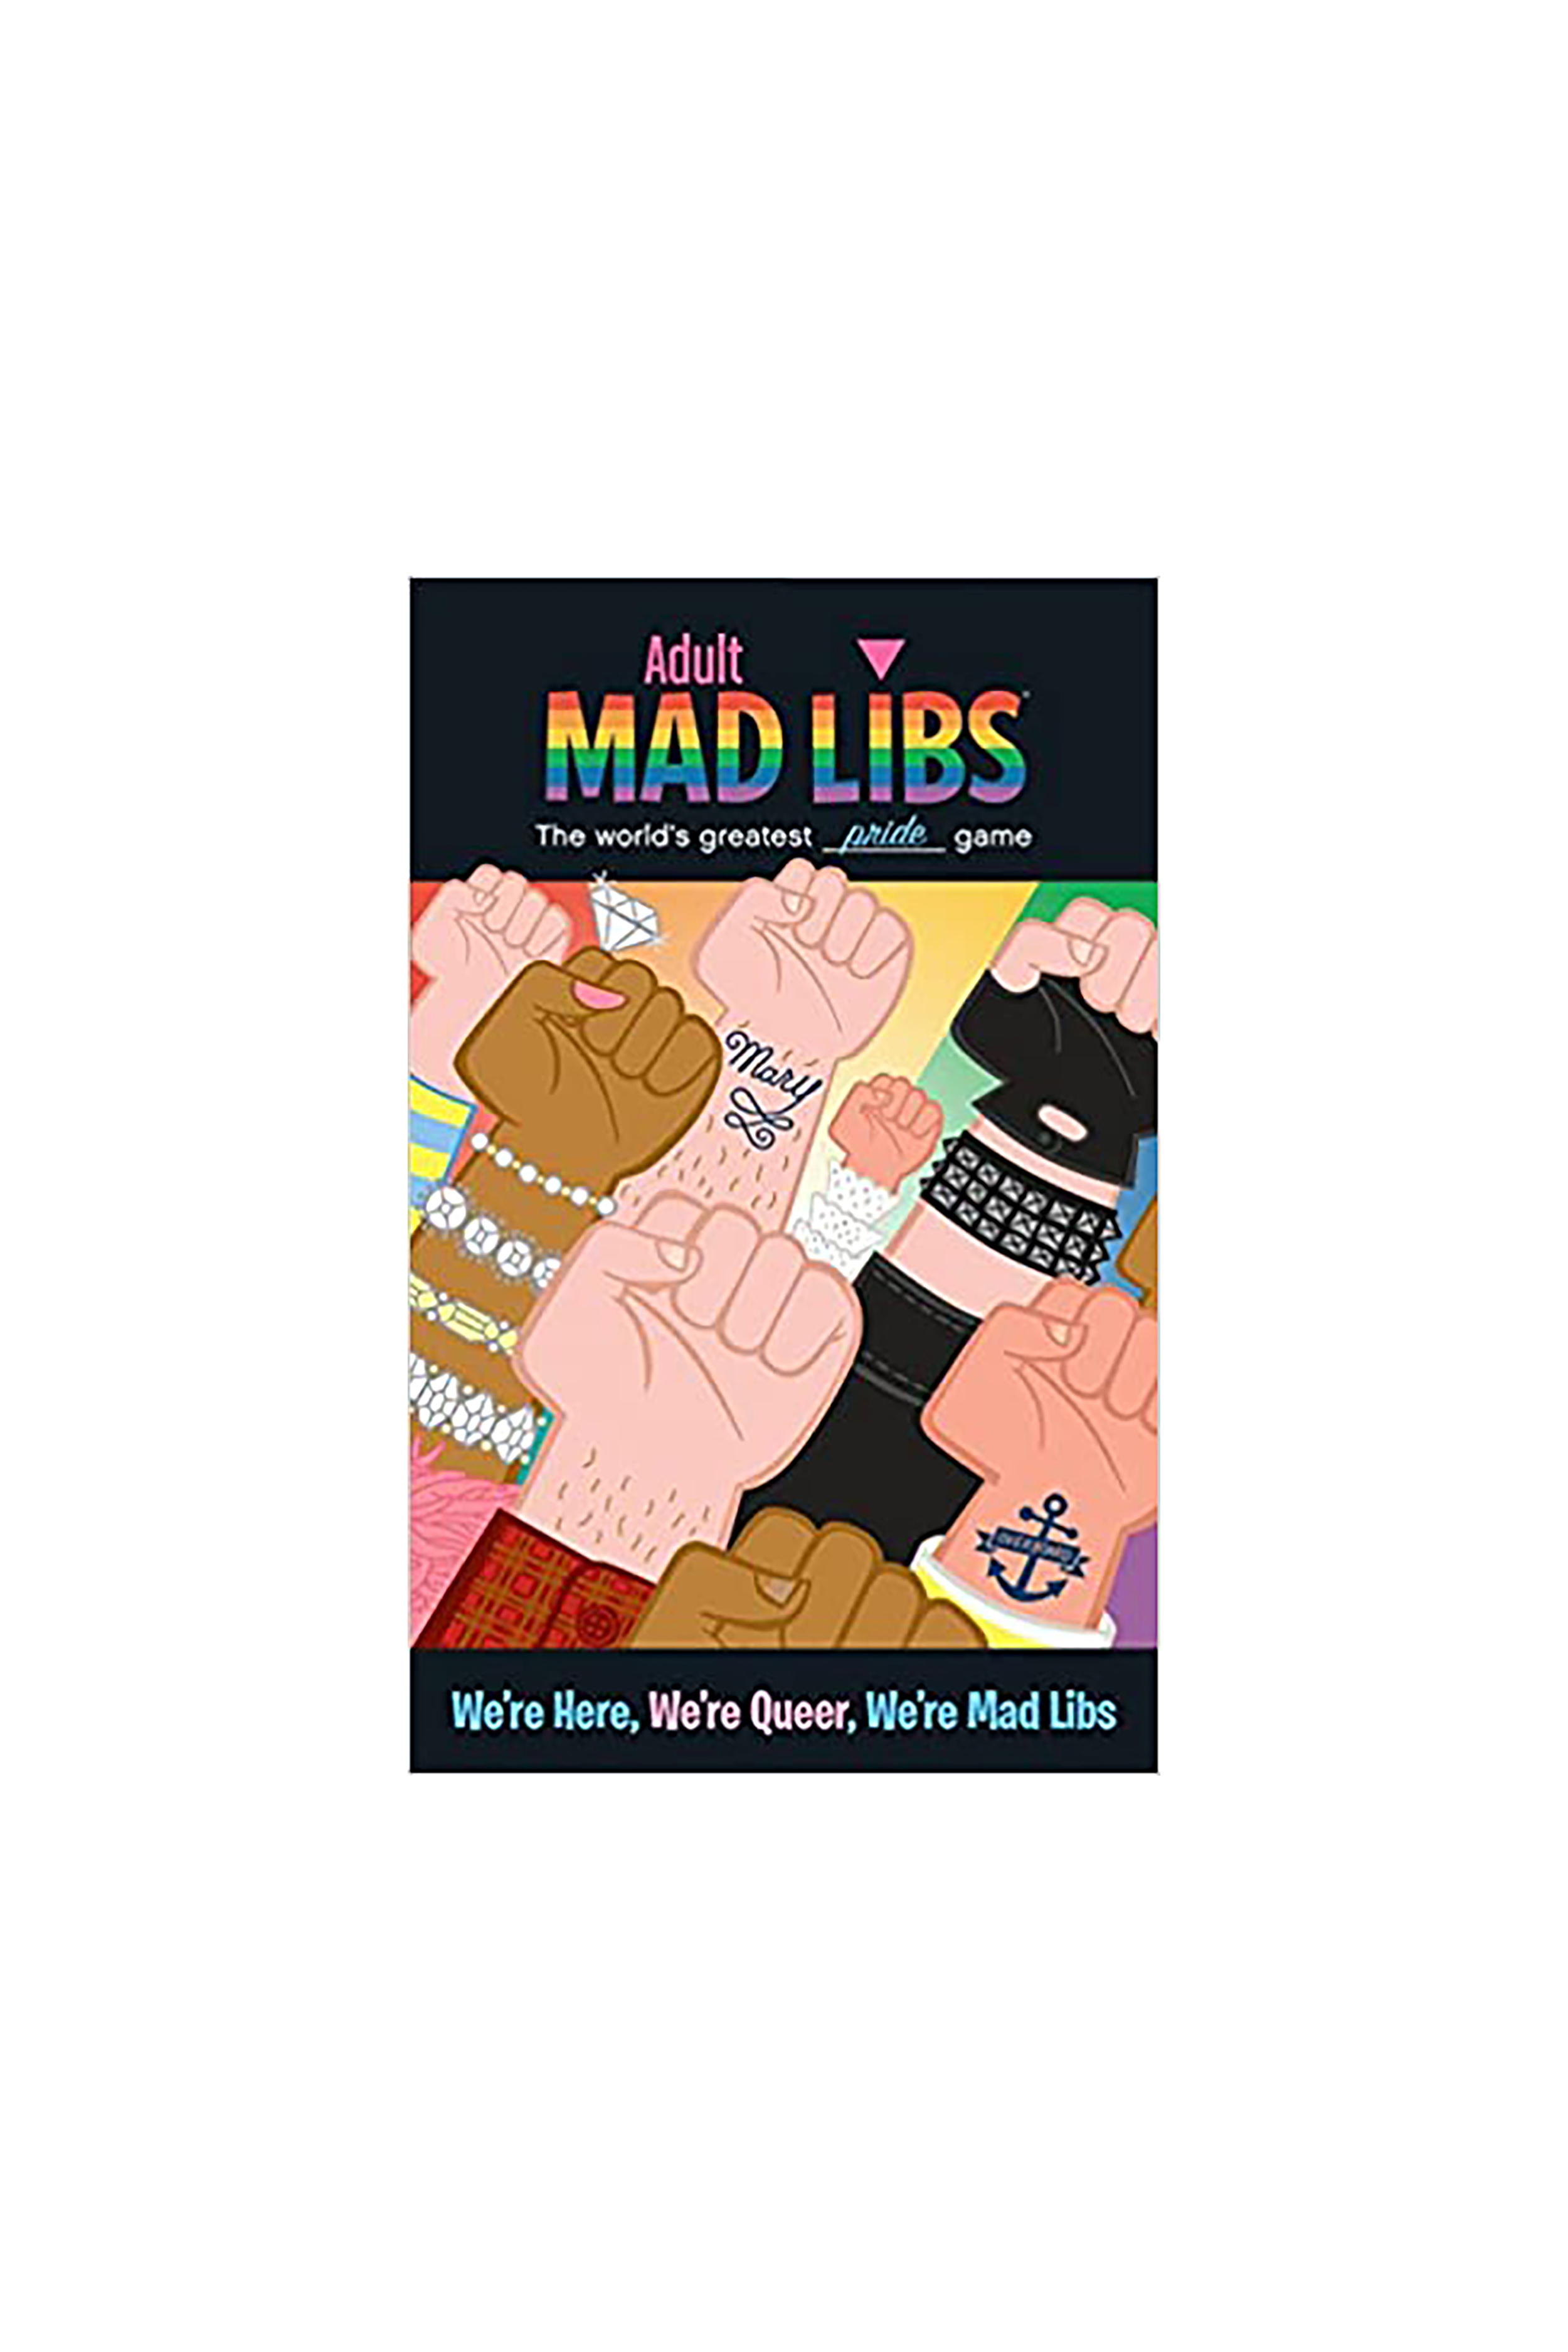 We're Here, We're Queer, We're Mad Libs!